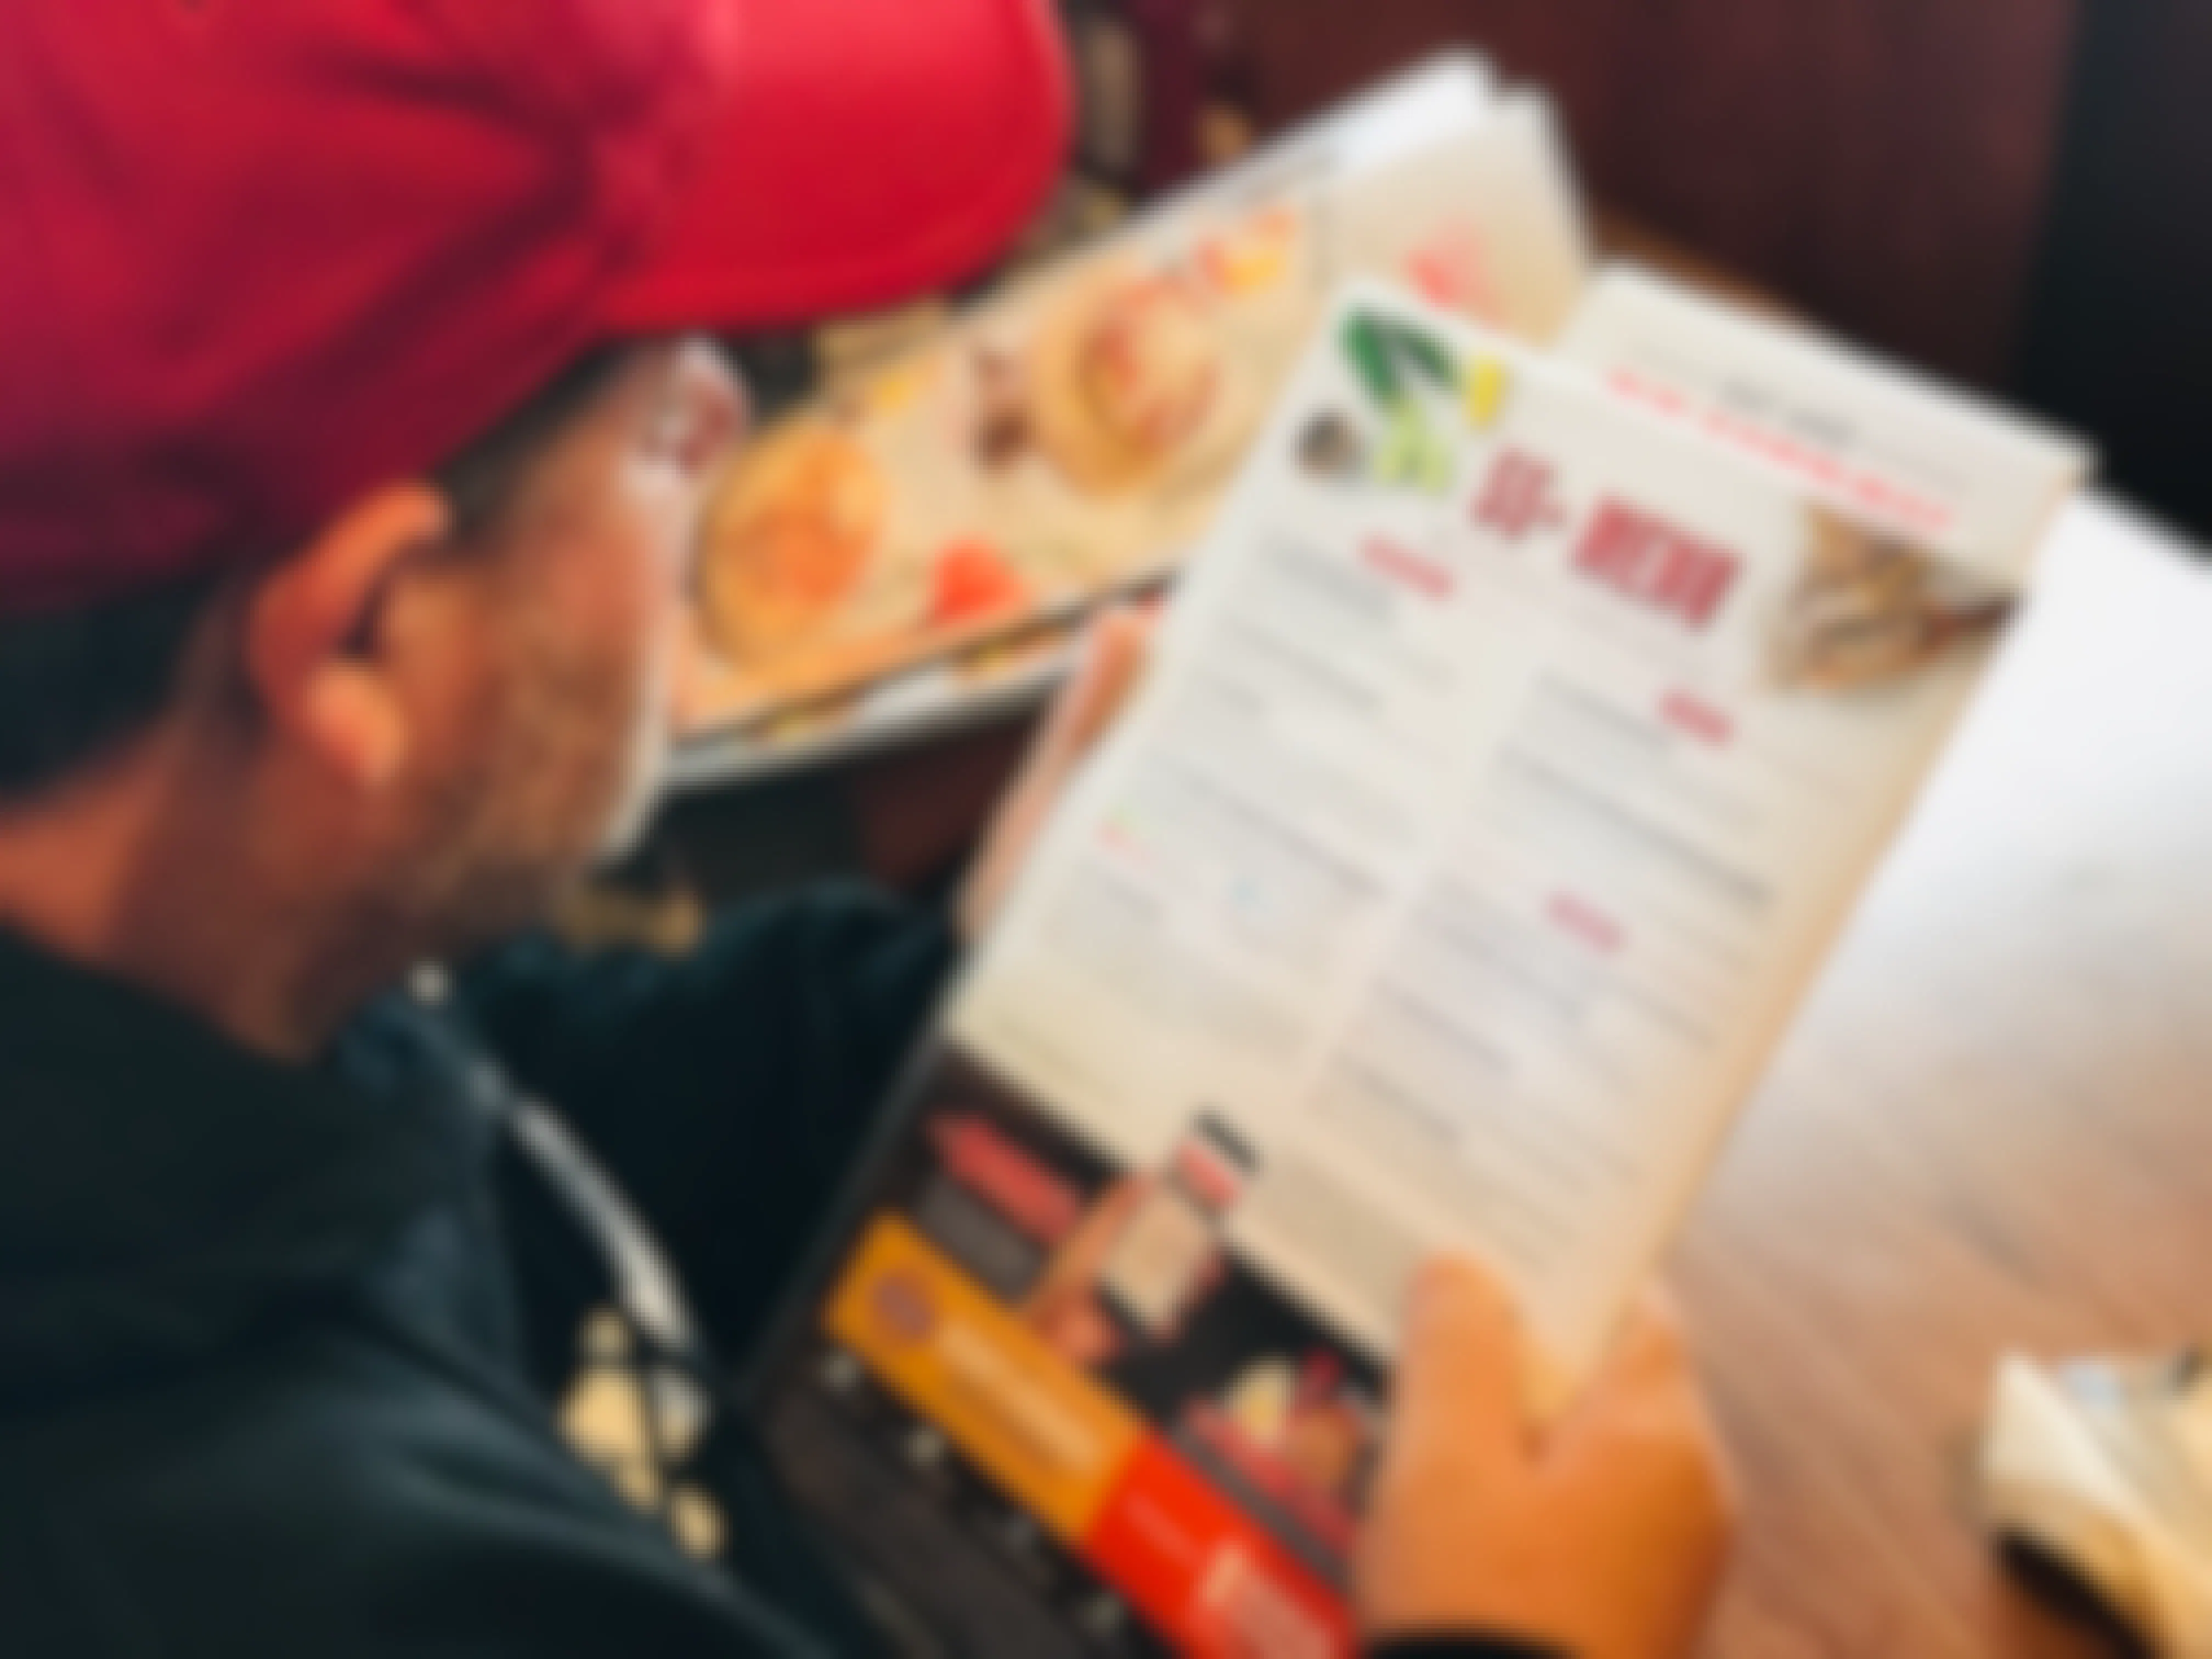 A man reading from the 55+ menu page while sitting in a booth at Denny's.